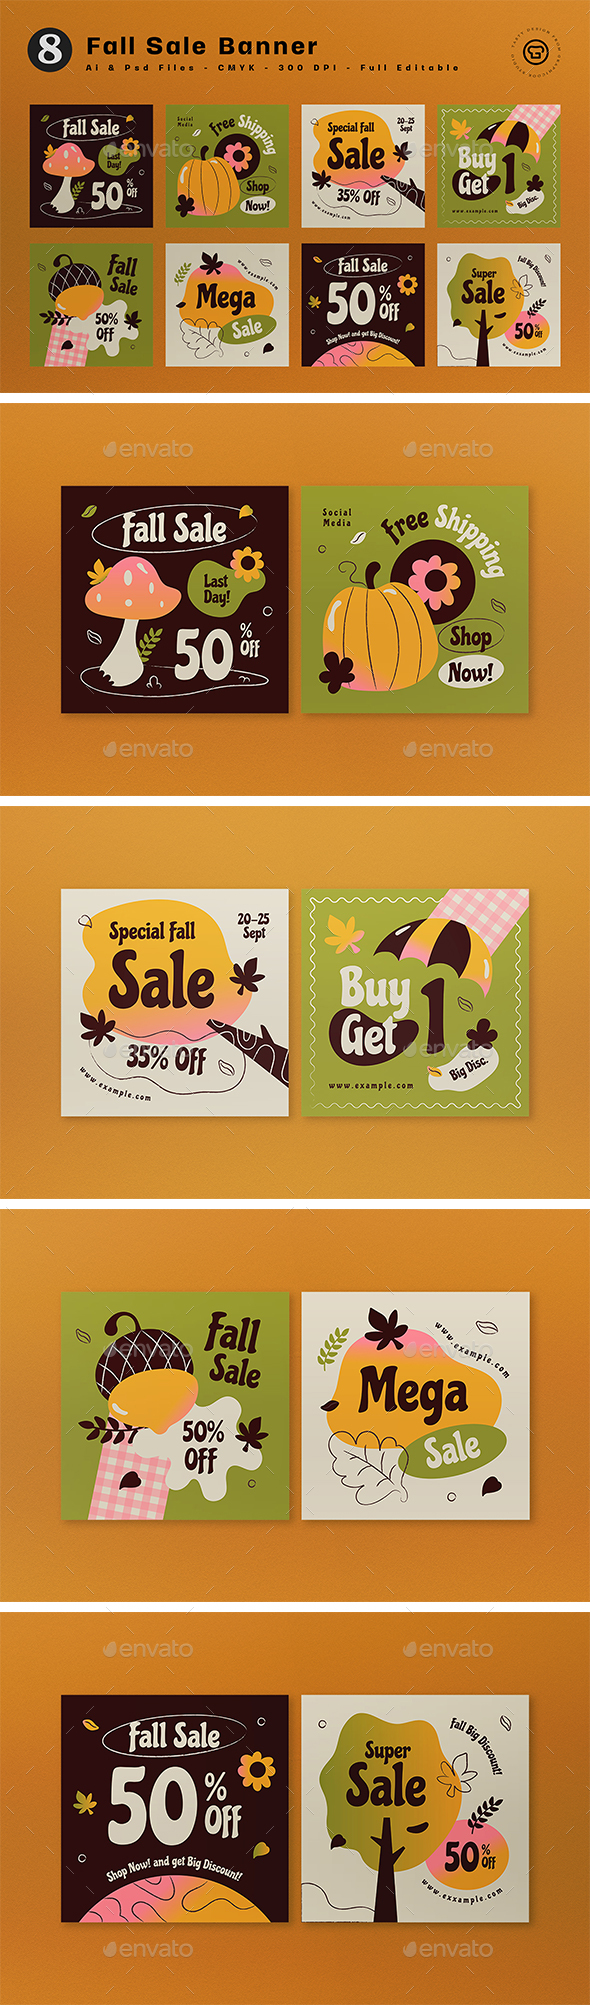 [DOWNLOAD]Green Brown Gradient Hand Drawn Fall Sale Banner